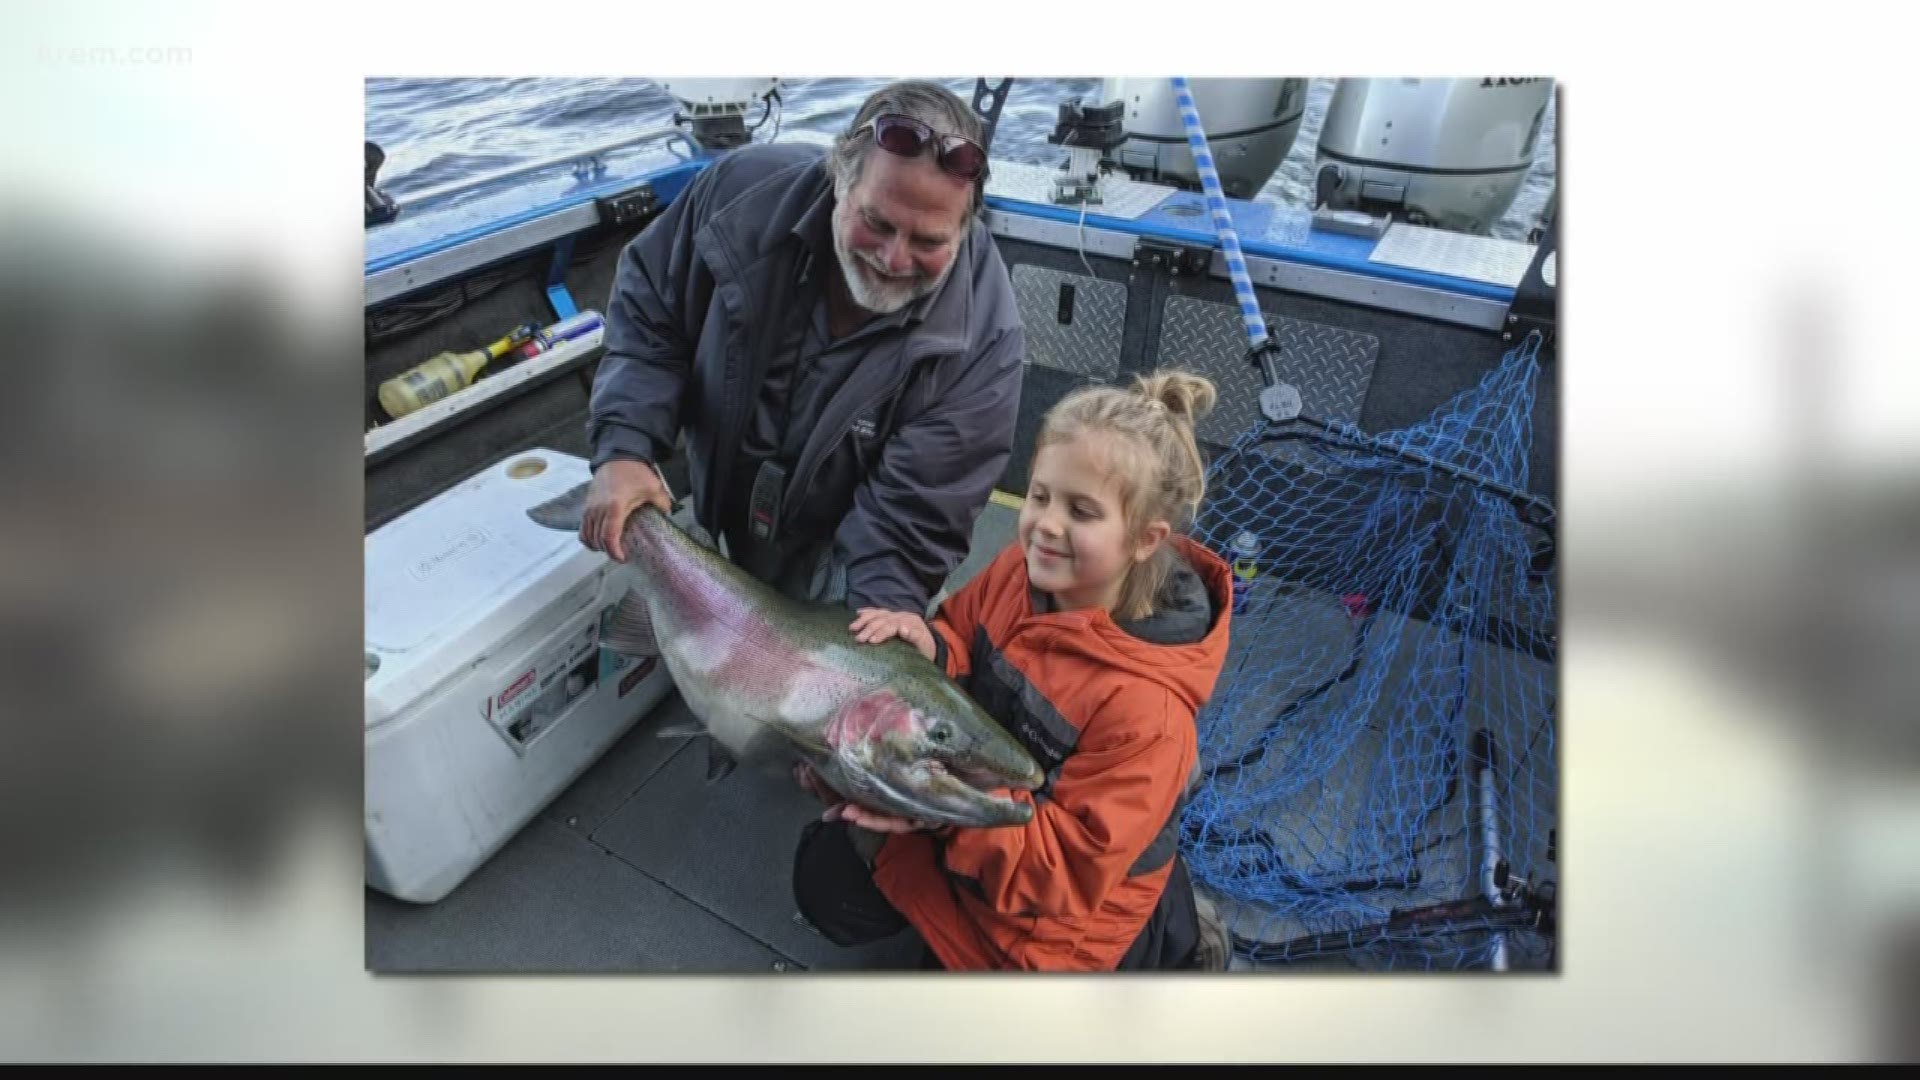 Sophie Egizi caught the fish on Lake Pend Oreille in early October. She said her hands were cramping and she spent 30 minutes reeling it in.